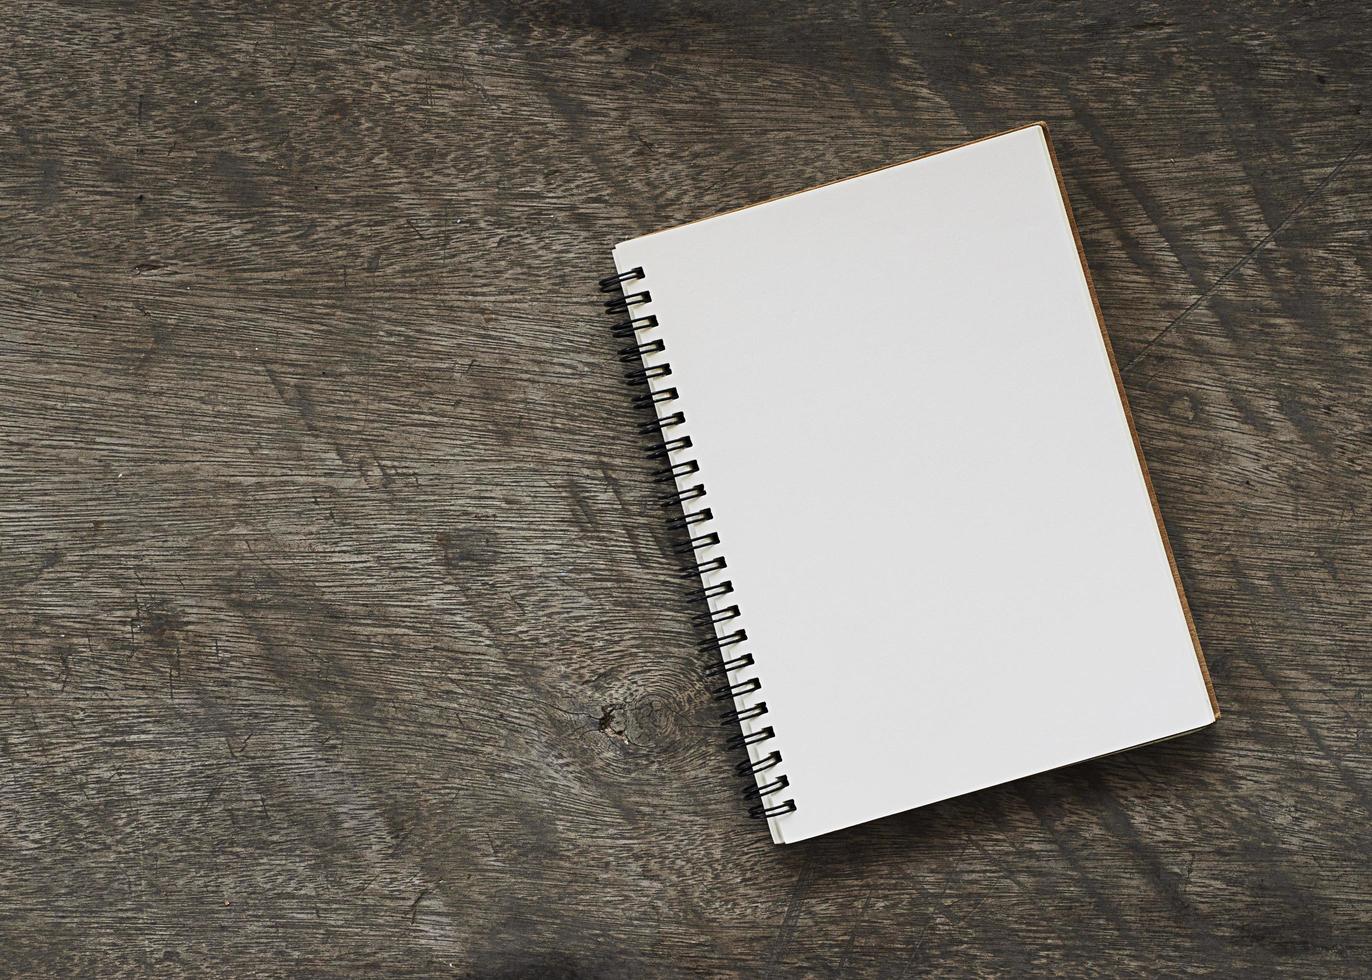 Book notes blank page on wooden background photo